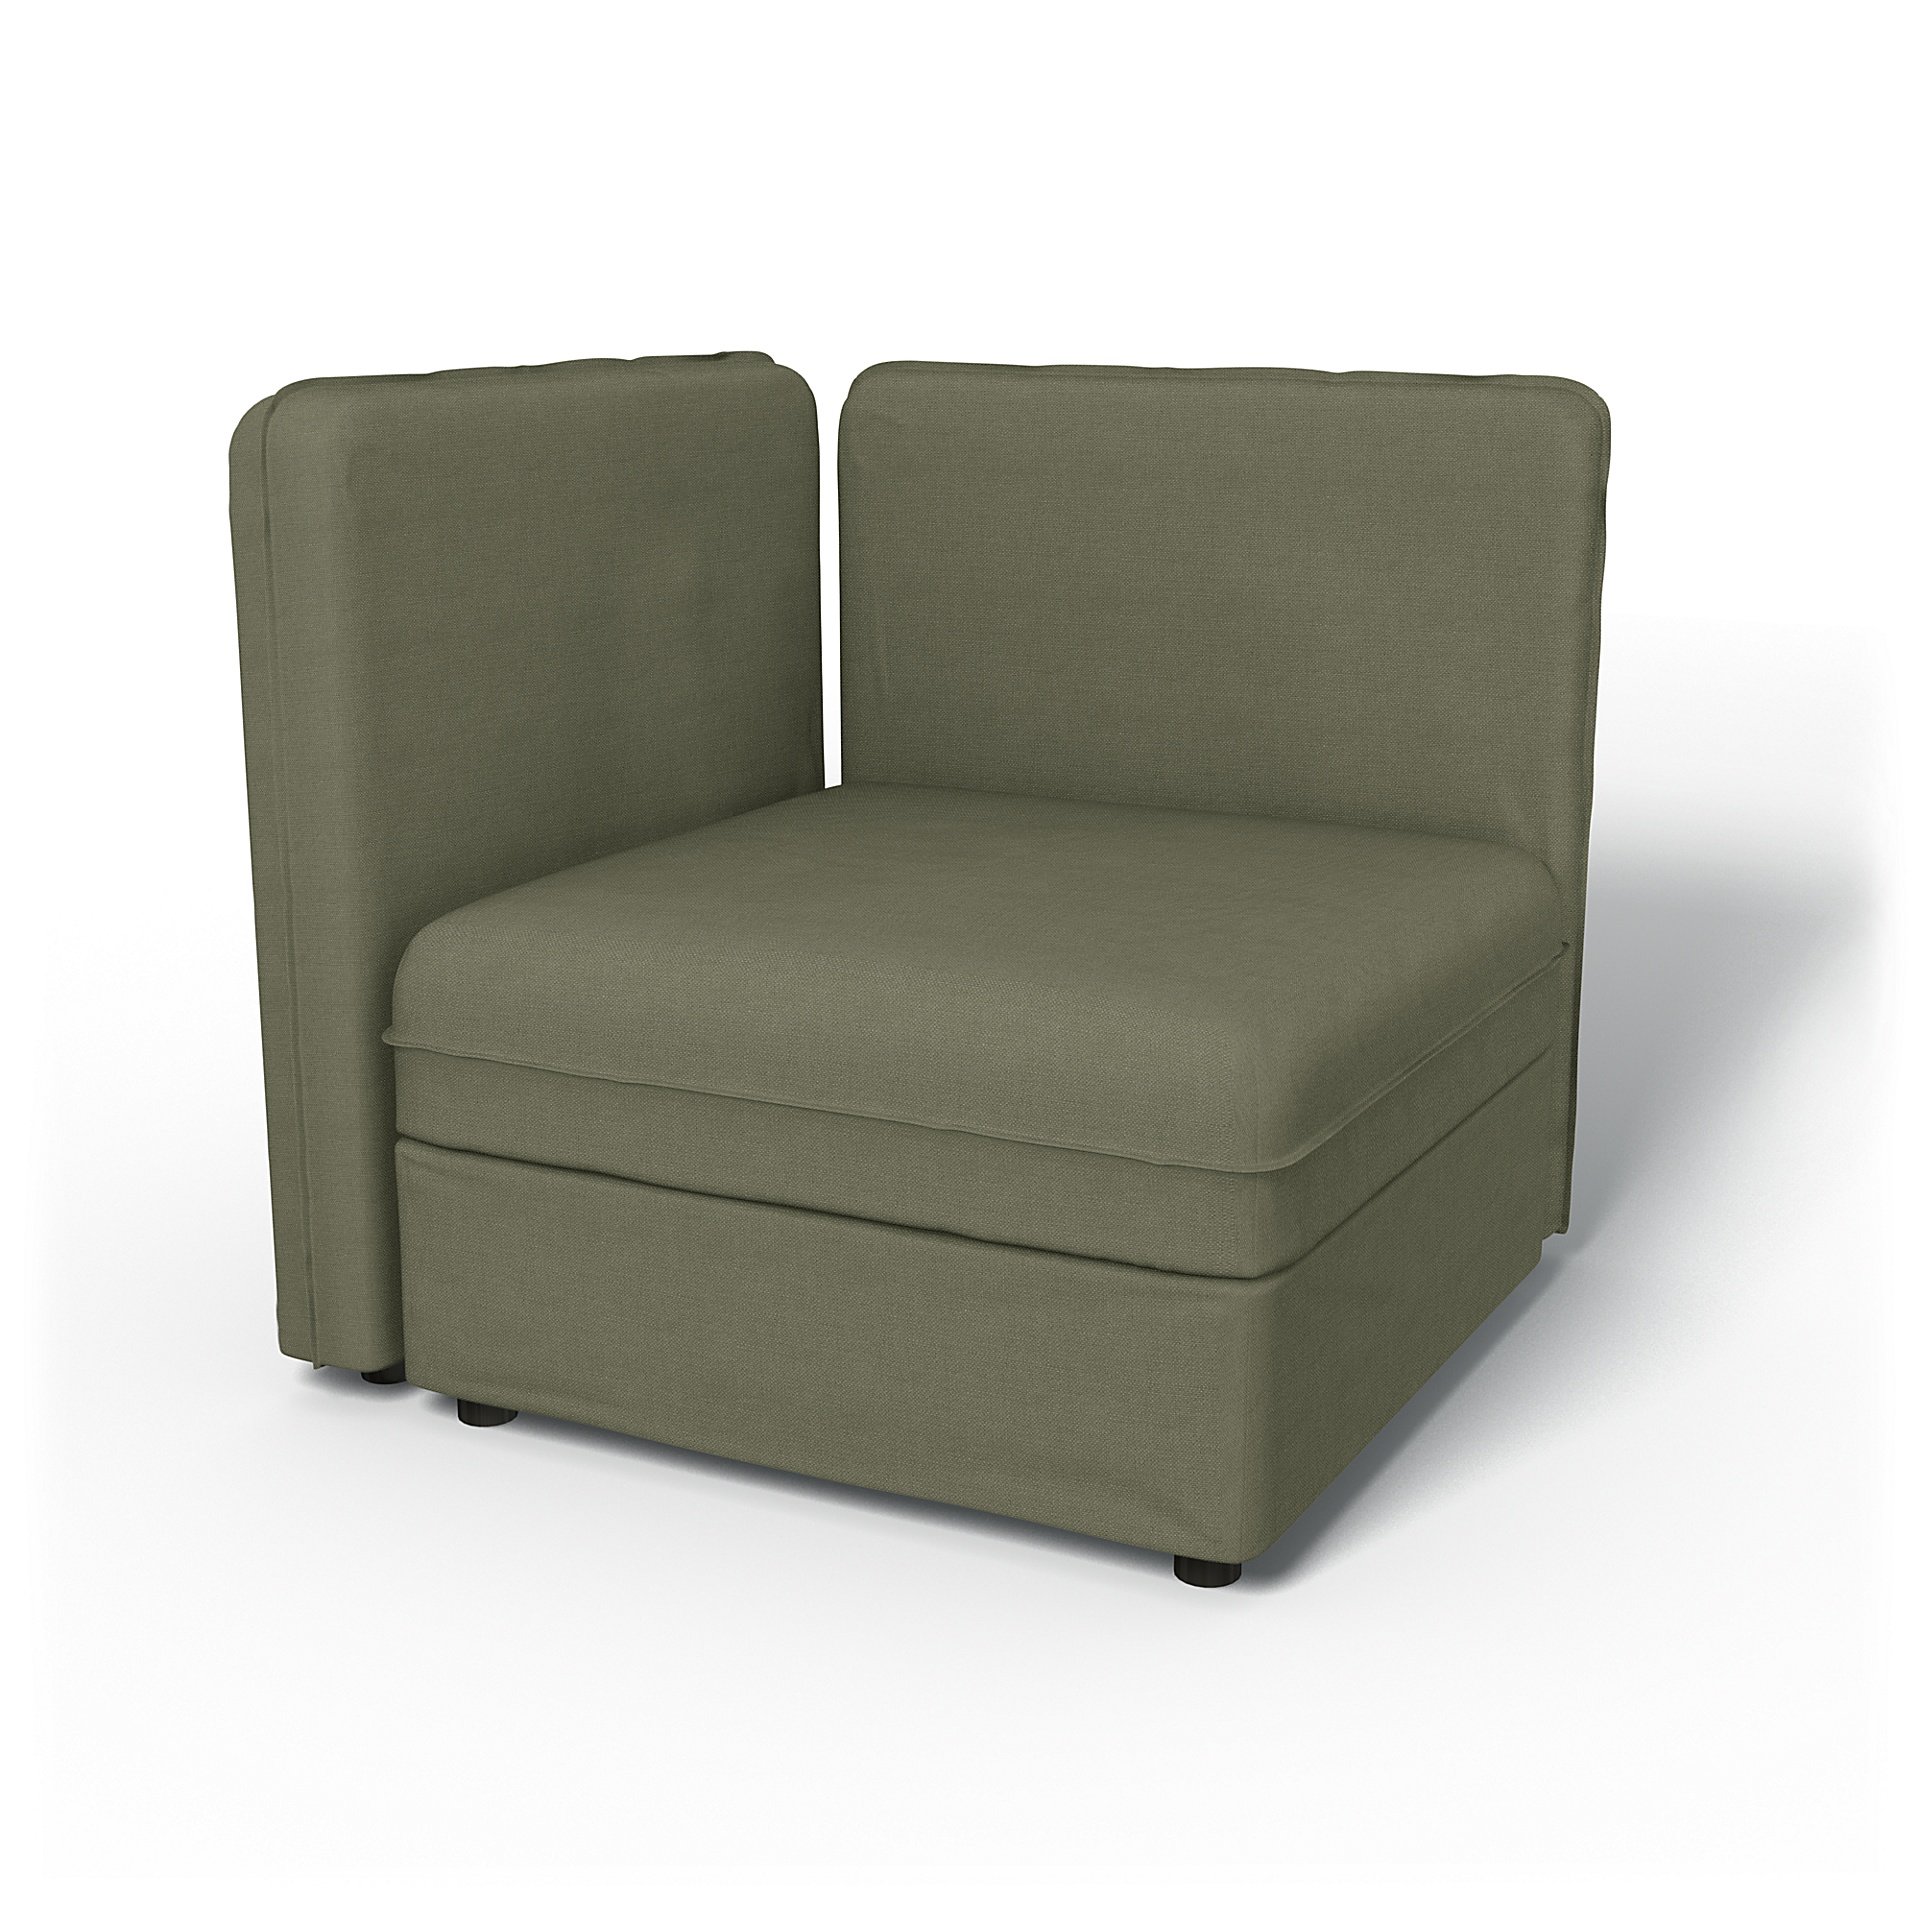 IKEA - Vallentuna Seat Module with Low Back and Storage Cover 80x80cm 32x32in, Sage, Linen - Bemz